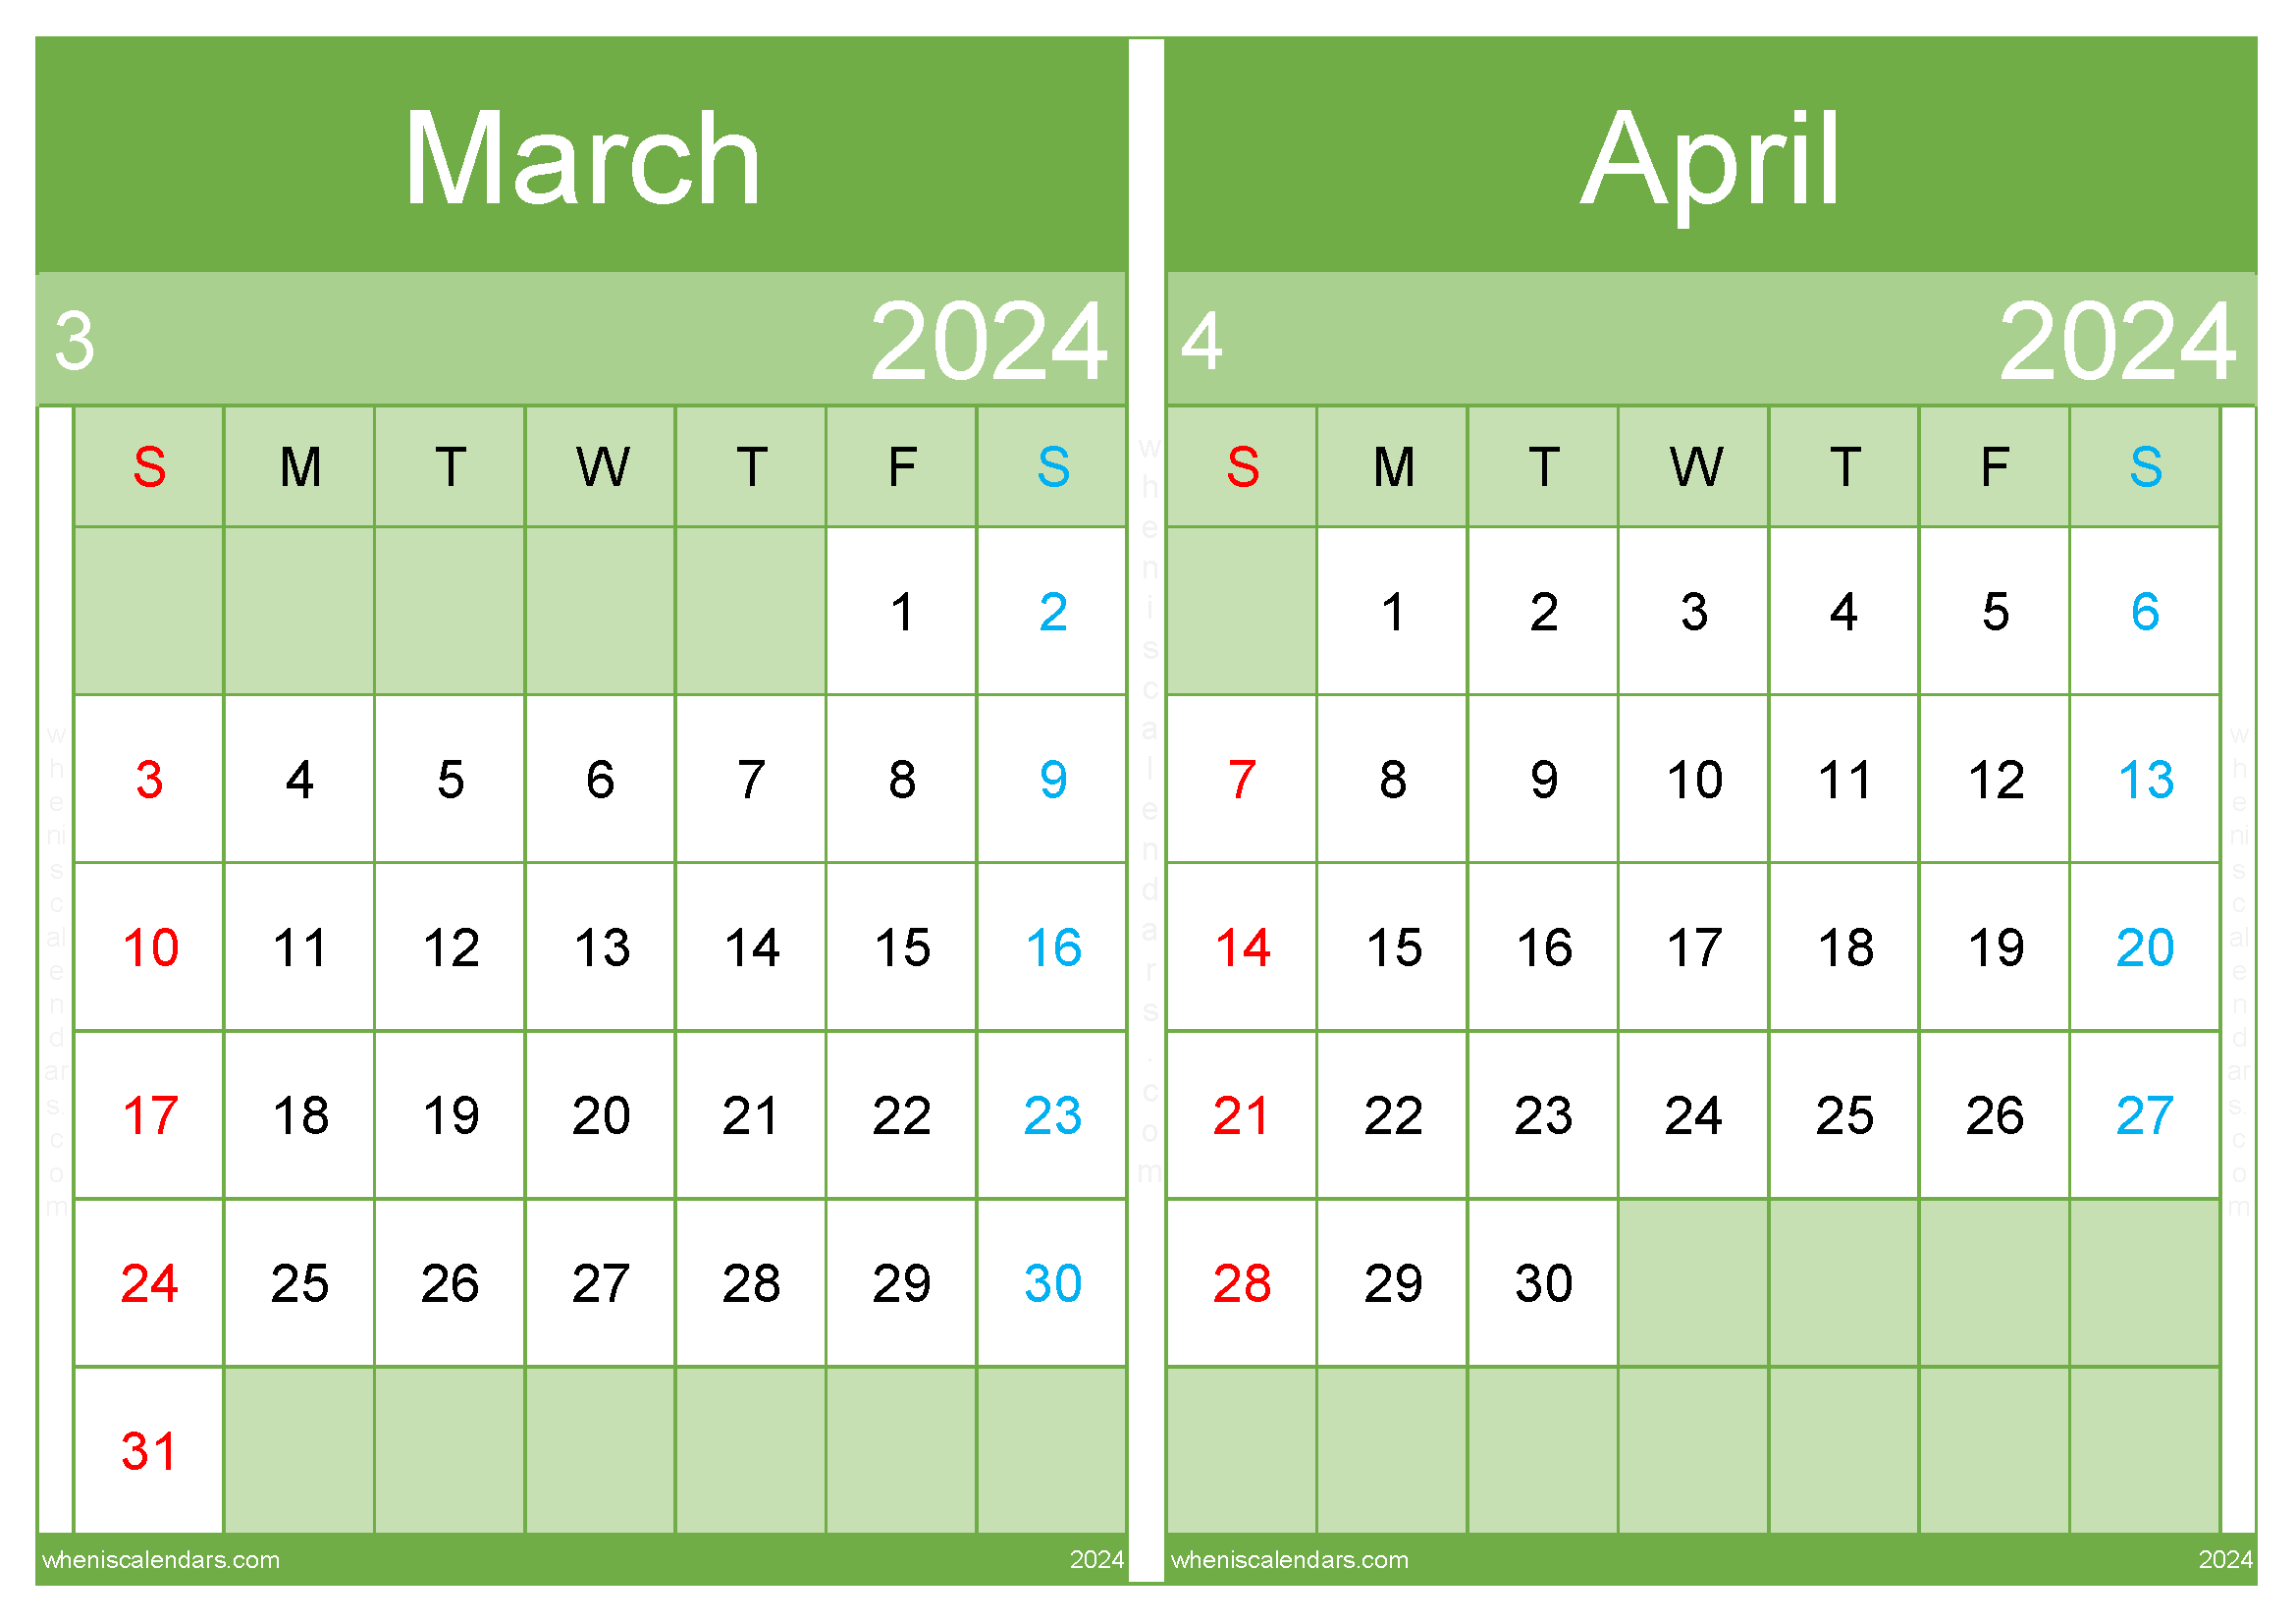 March and April Calendar 2024 Two-Month